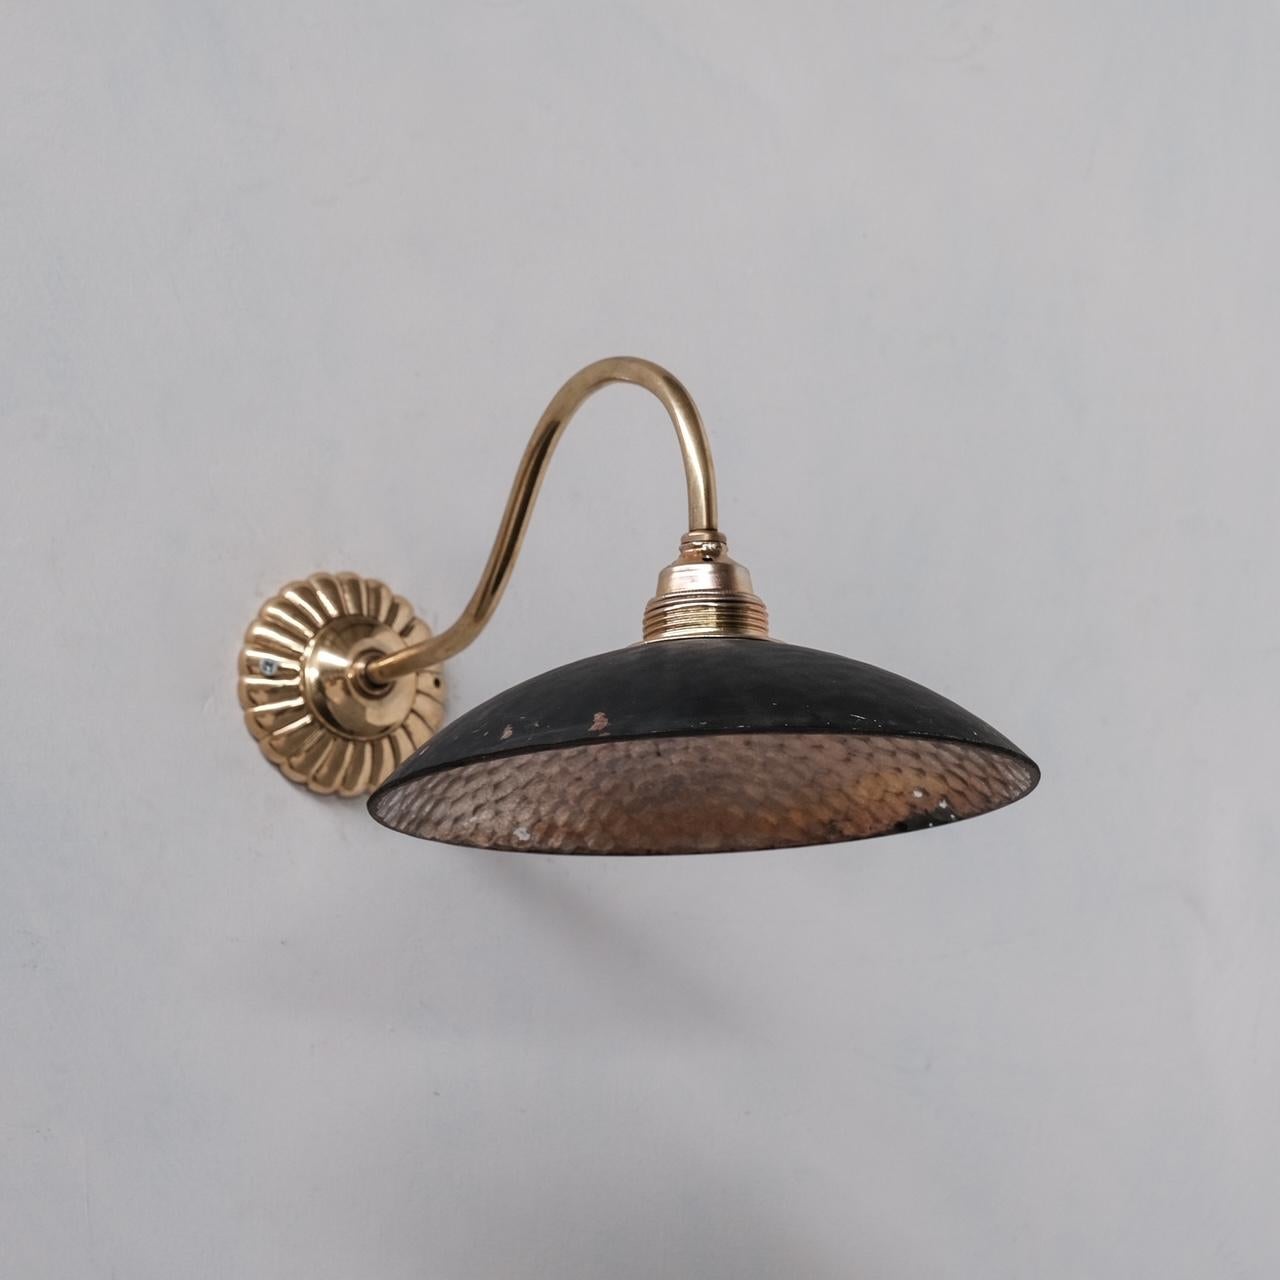 British Antique Brass and Mercury Glass Wall Lights '19 Available' For Sale